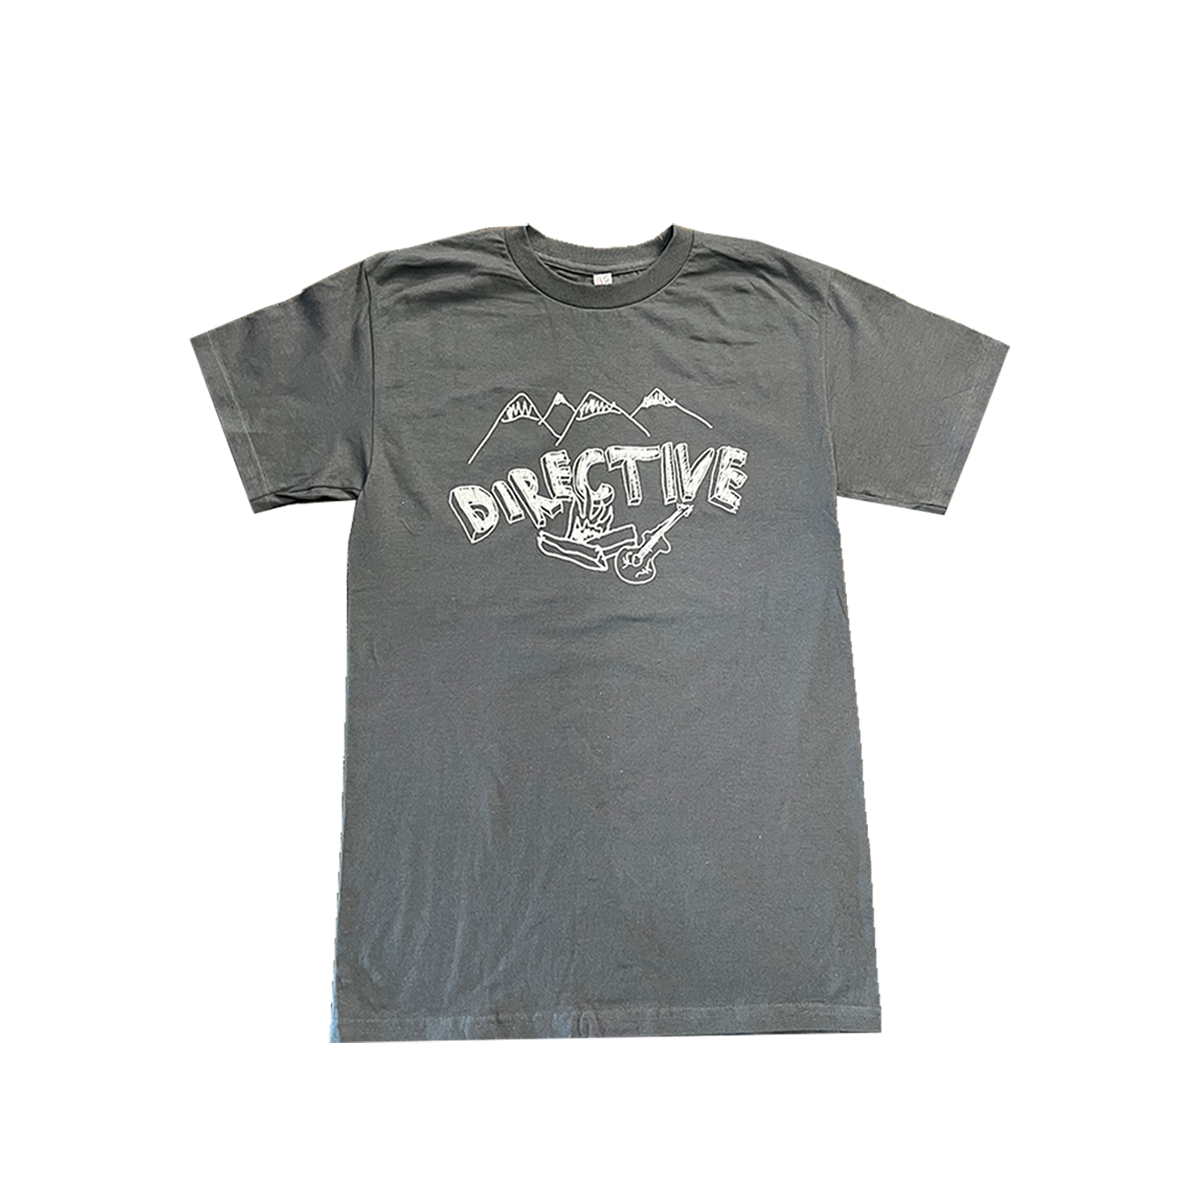 Directive Camp T-Shirt - Charcoal